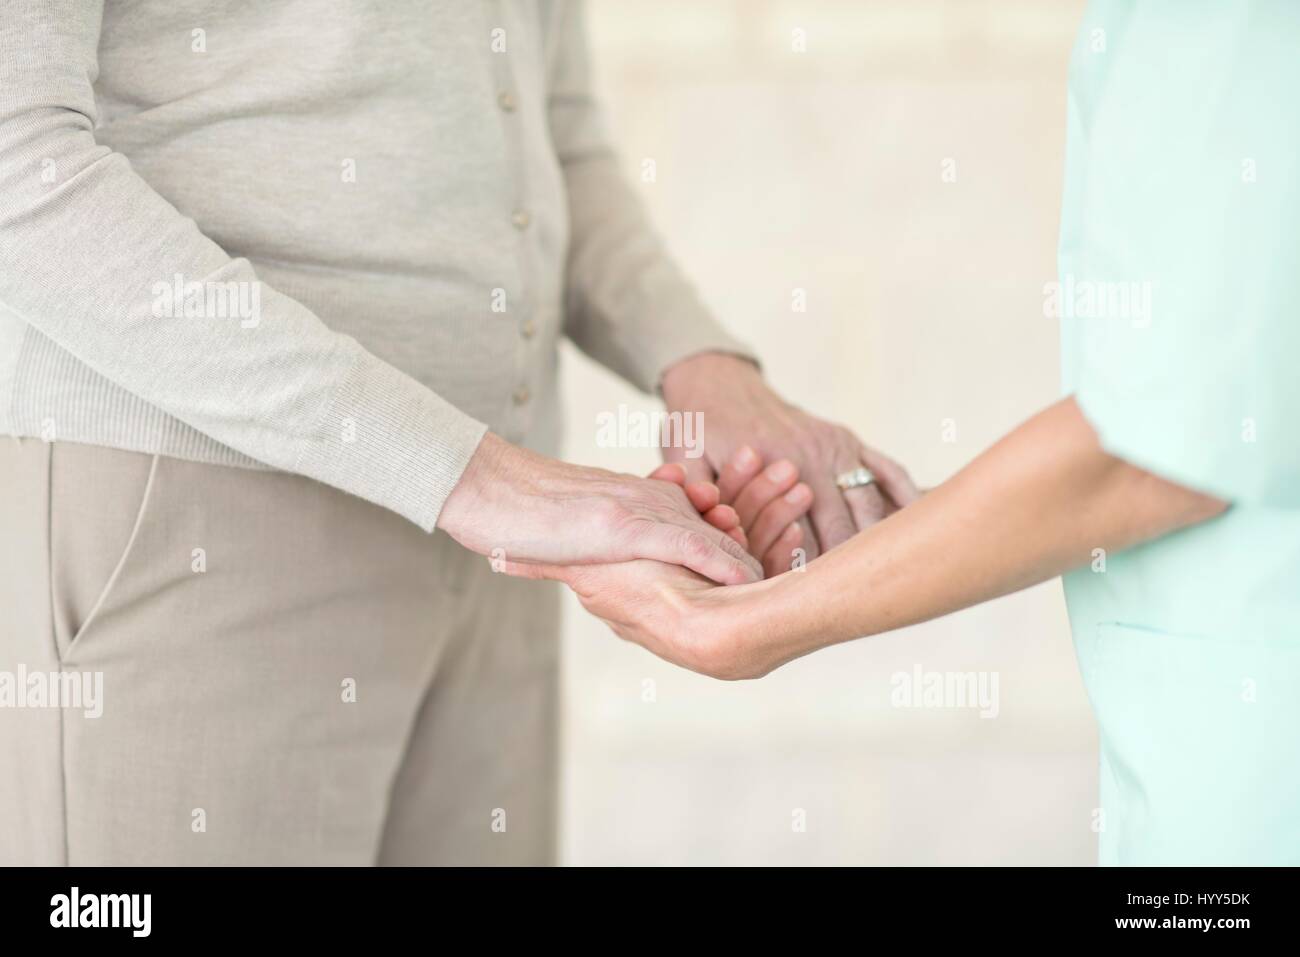 Care worker holding senior woman's hands. Stock Photo